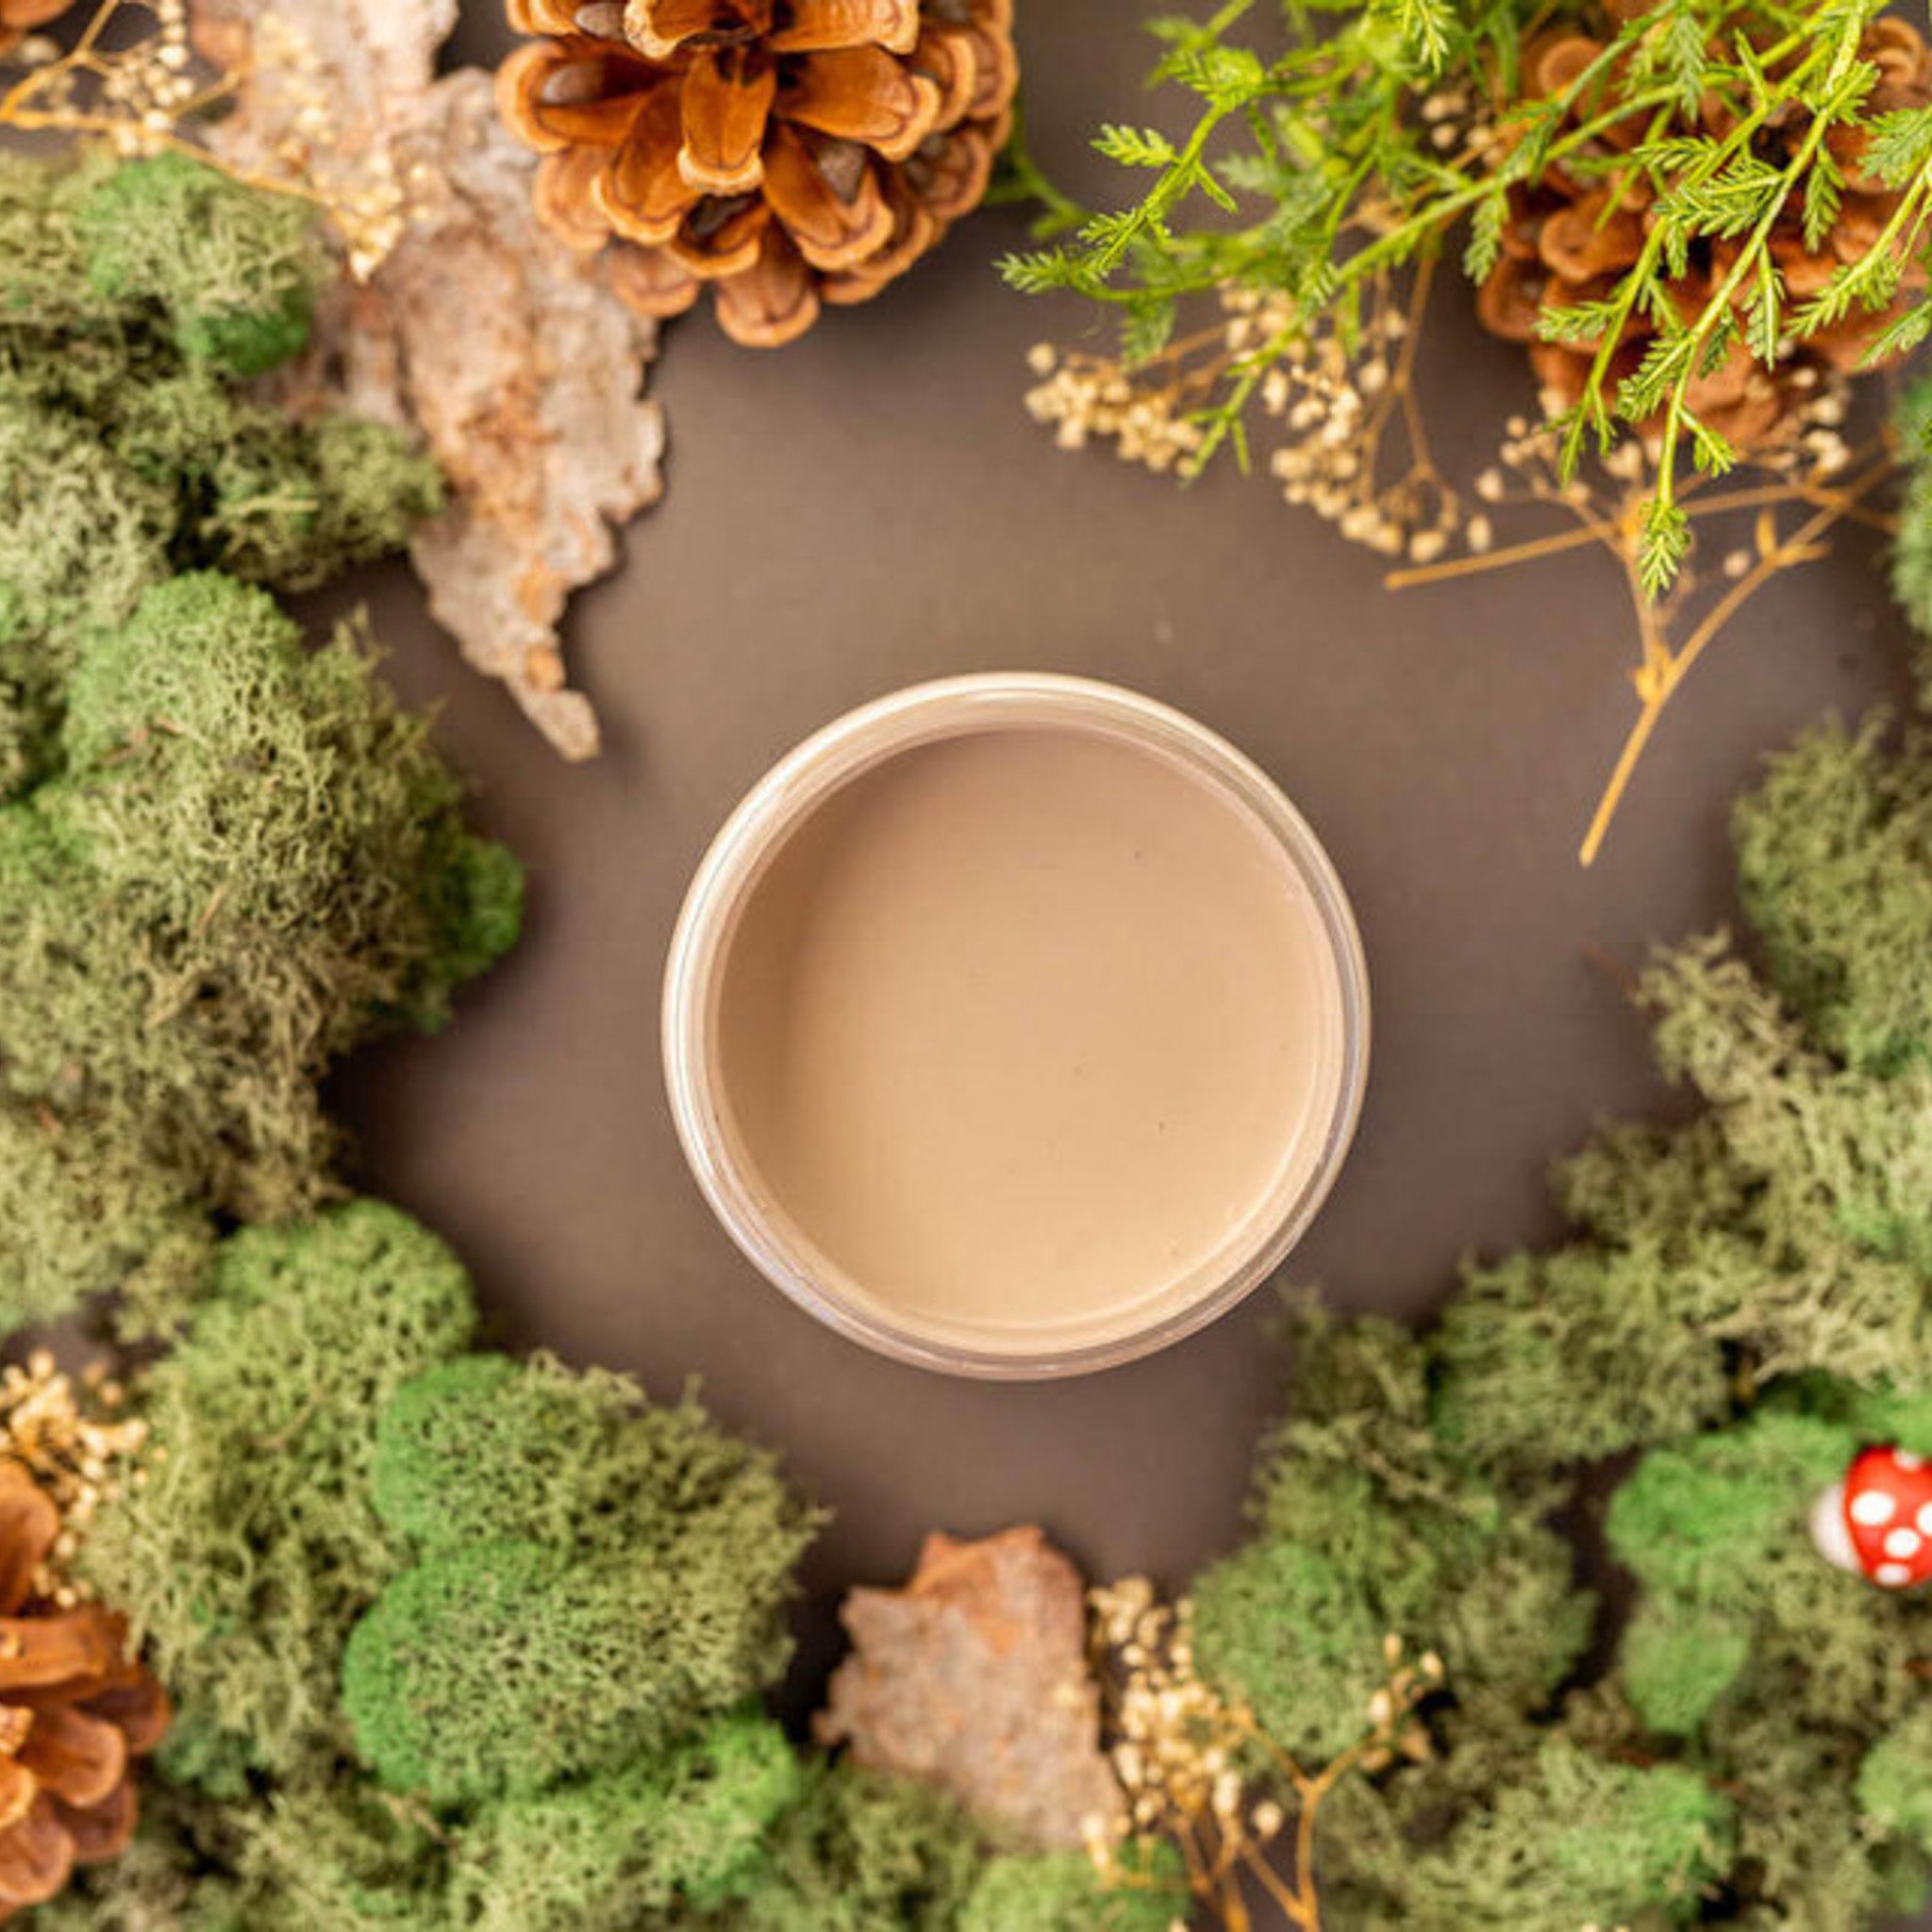 An arial view of an open container of Dixie Belle Paint Company's Cobblestone Chalk Mineral Paint is surrounded by green peat moss against a brown table.